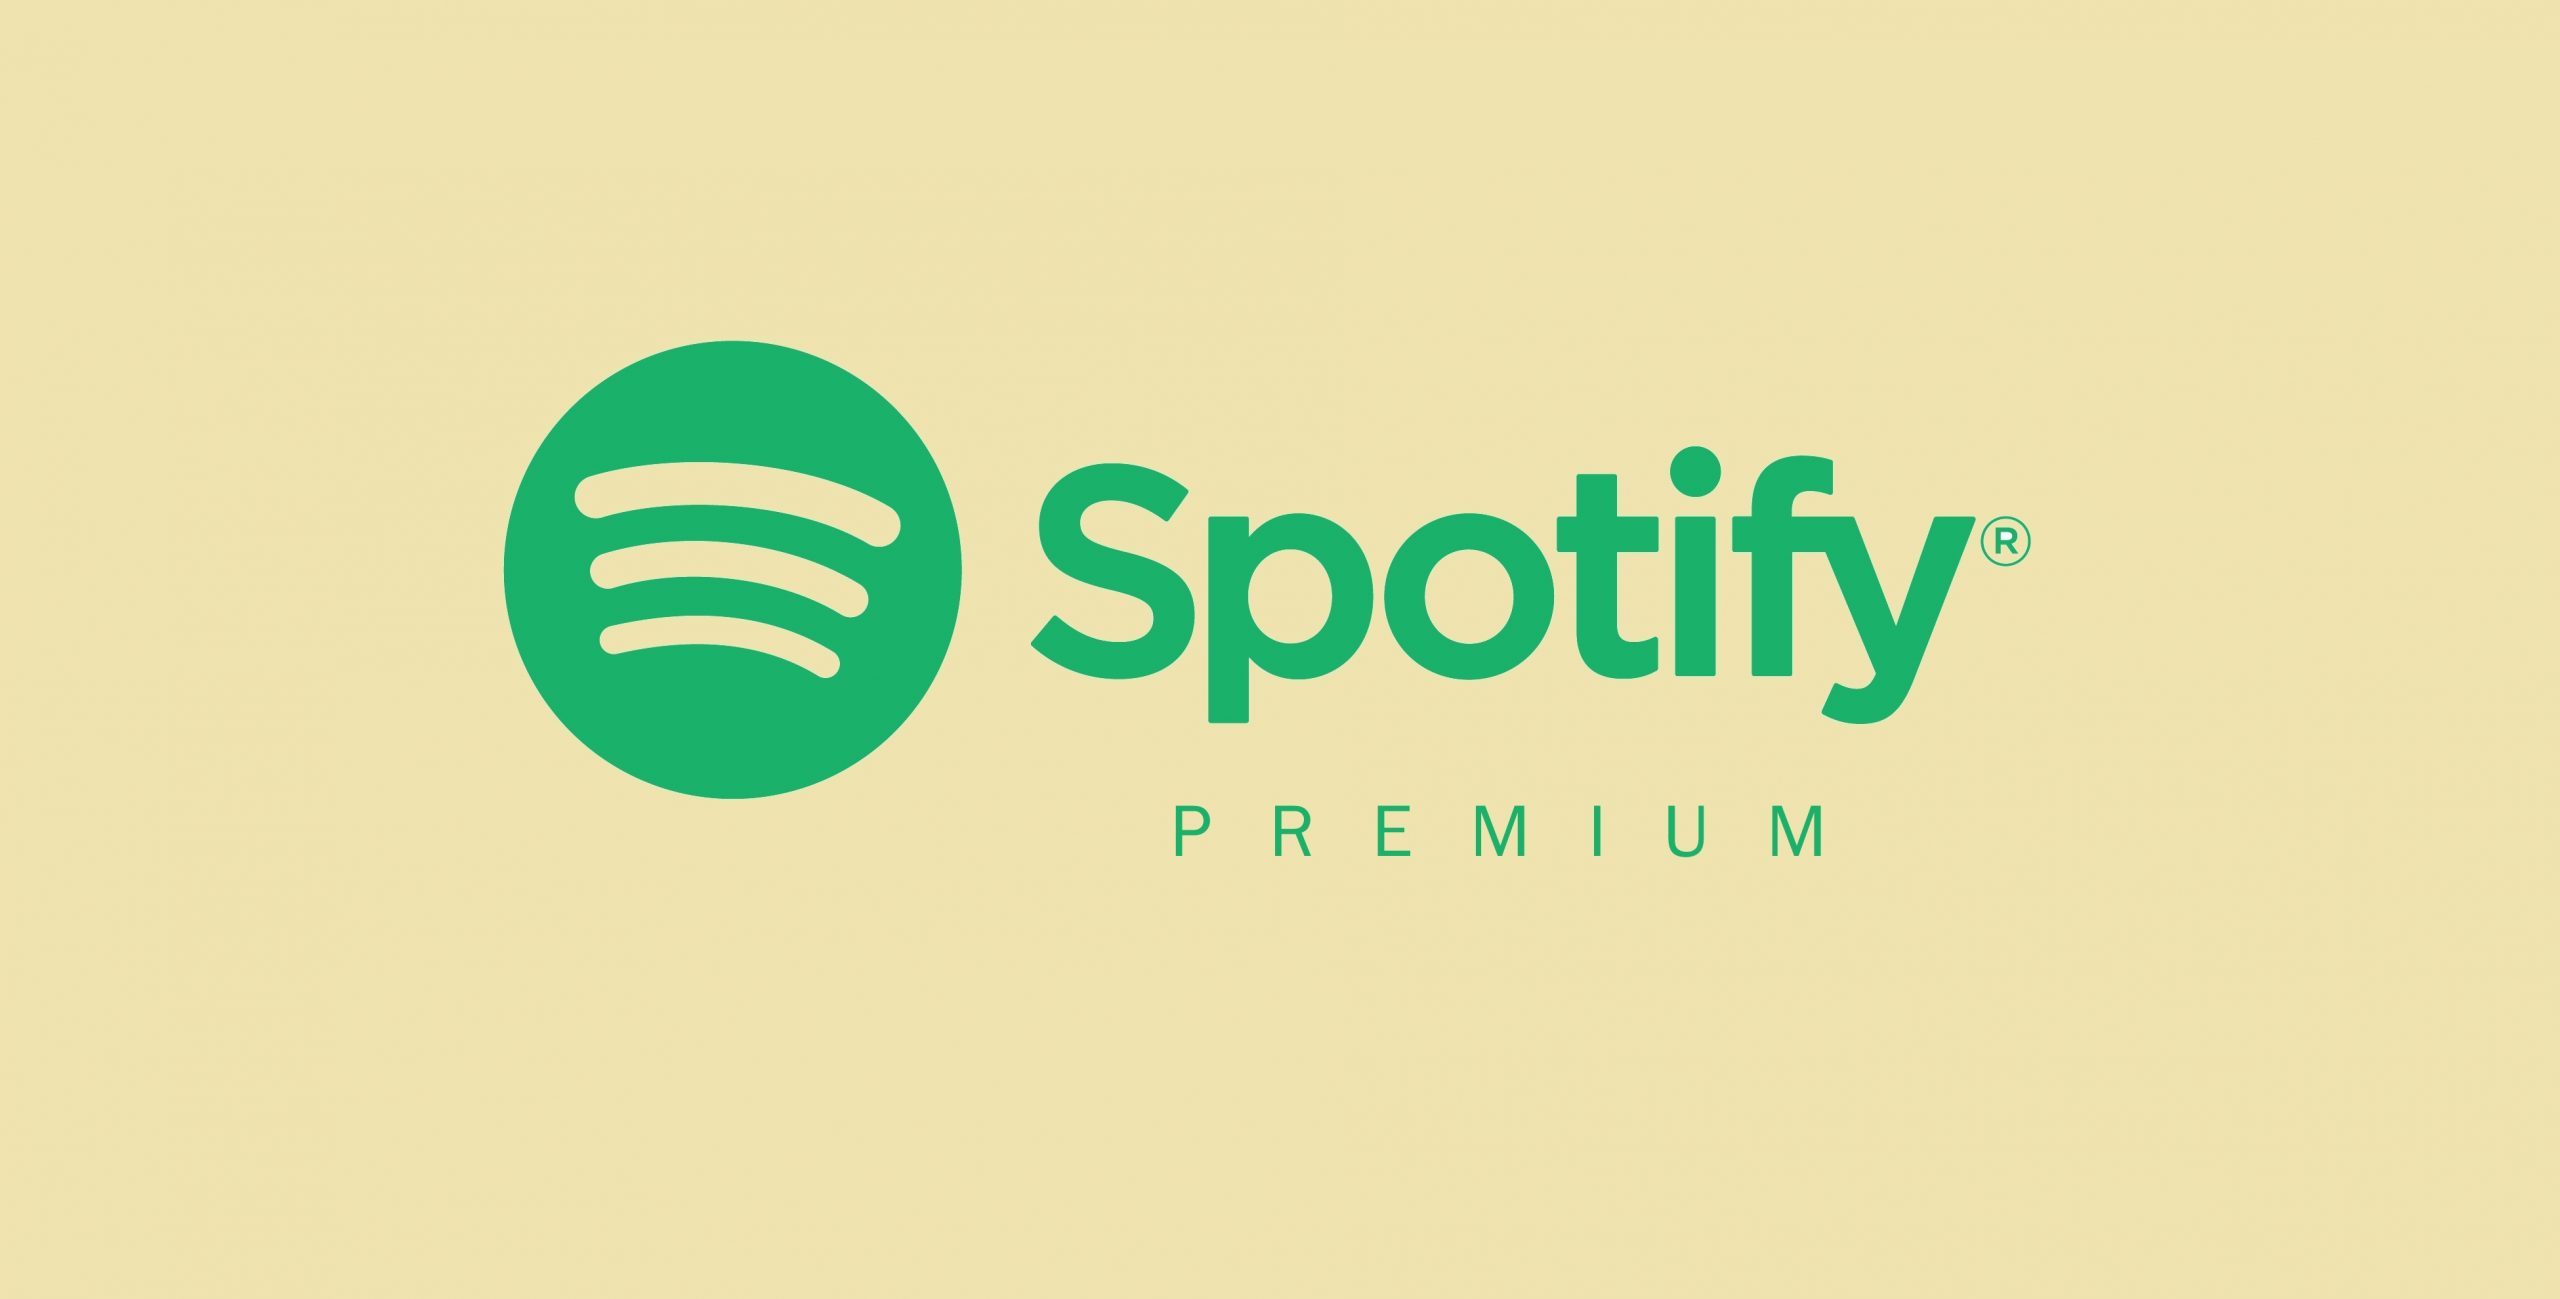 Spotify Premium Is Now Free For 3 Months For Eligible 3 Months From Today